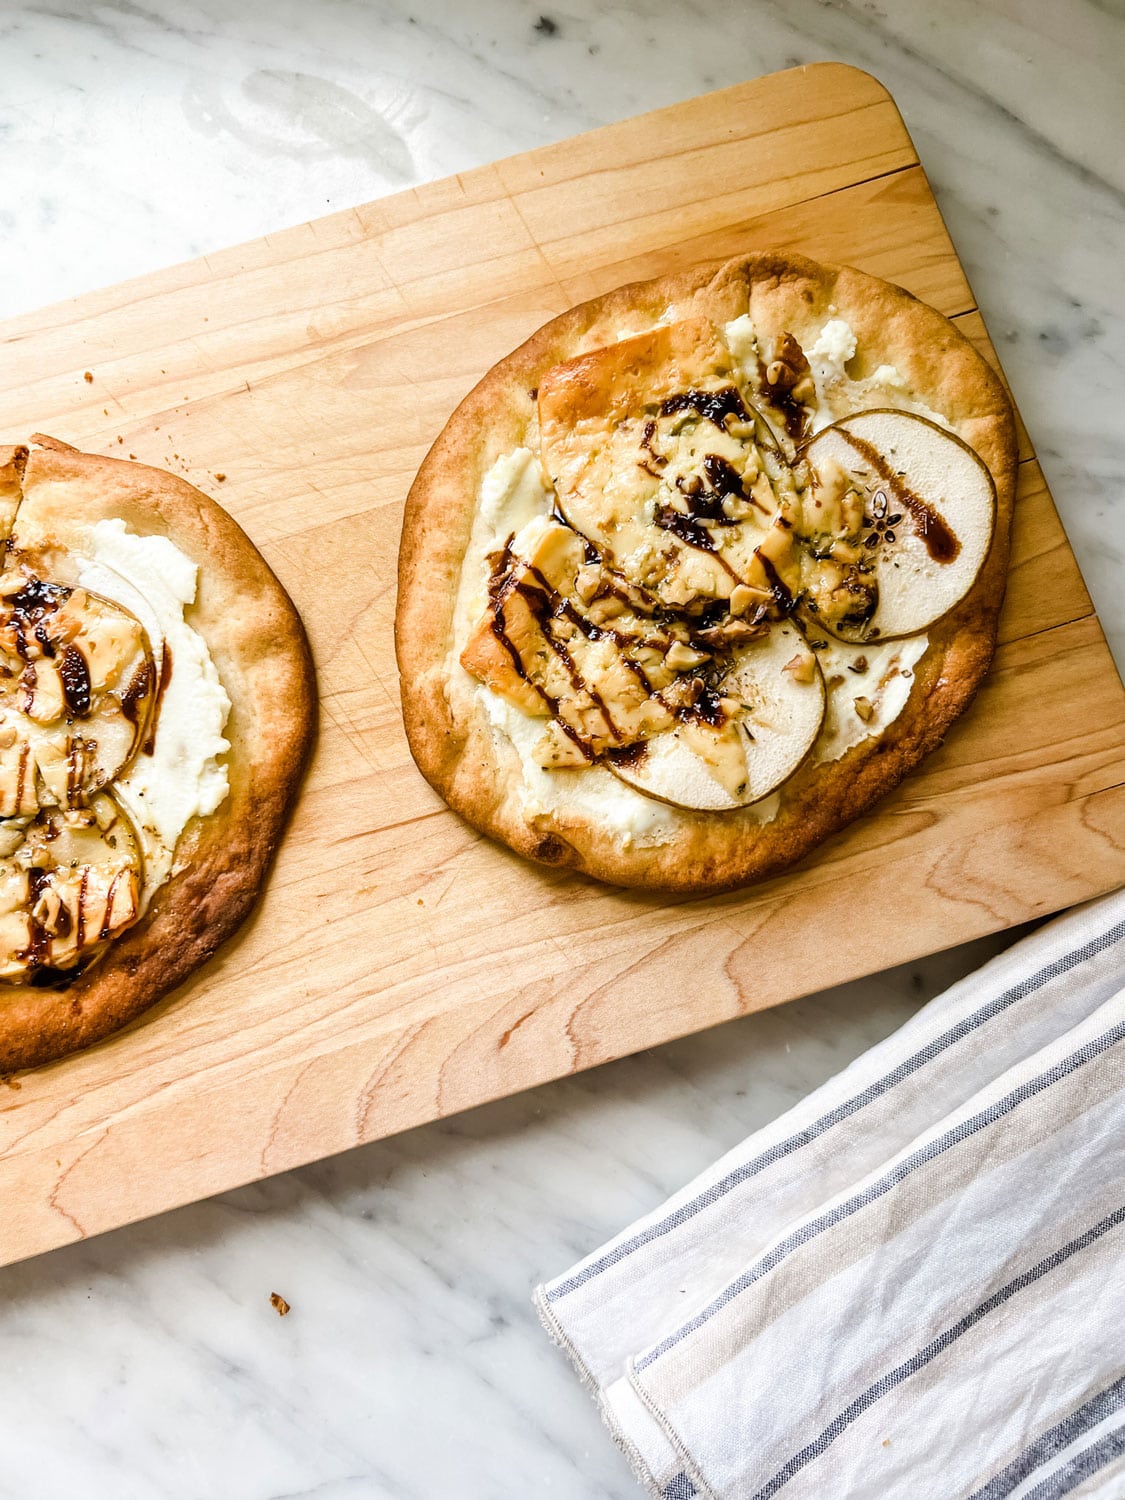 Quick & easy Pita Pizza - We used ricotta cheese, pears, gorgonzola, herbs de provence and walnuts with honey, olive oil, and balsamic